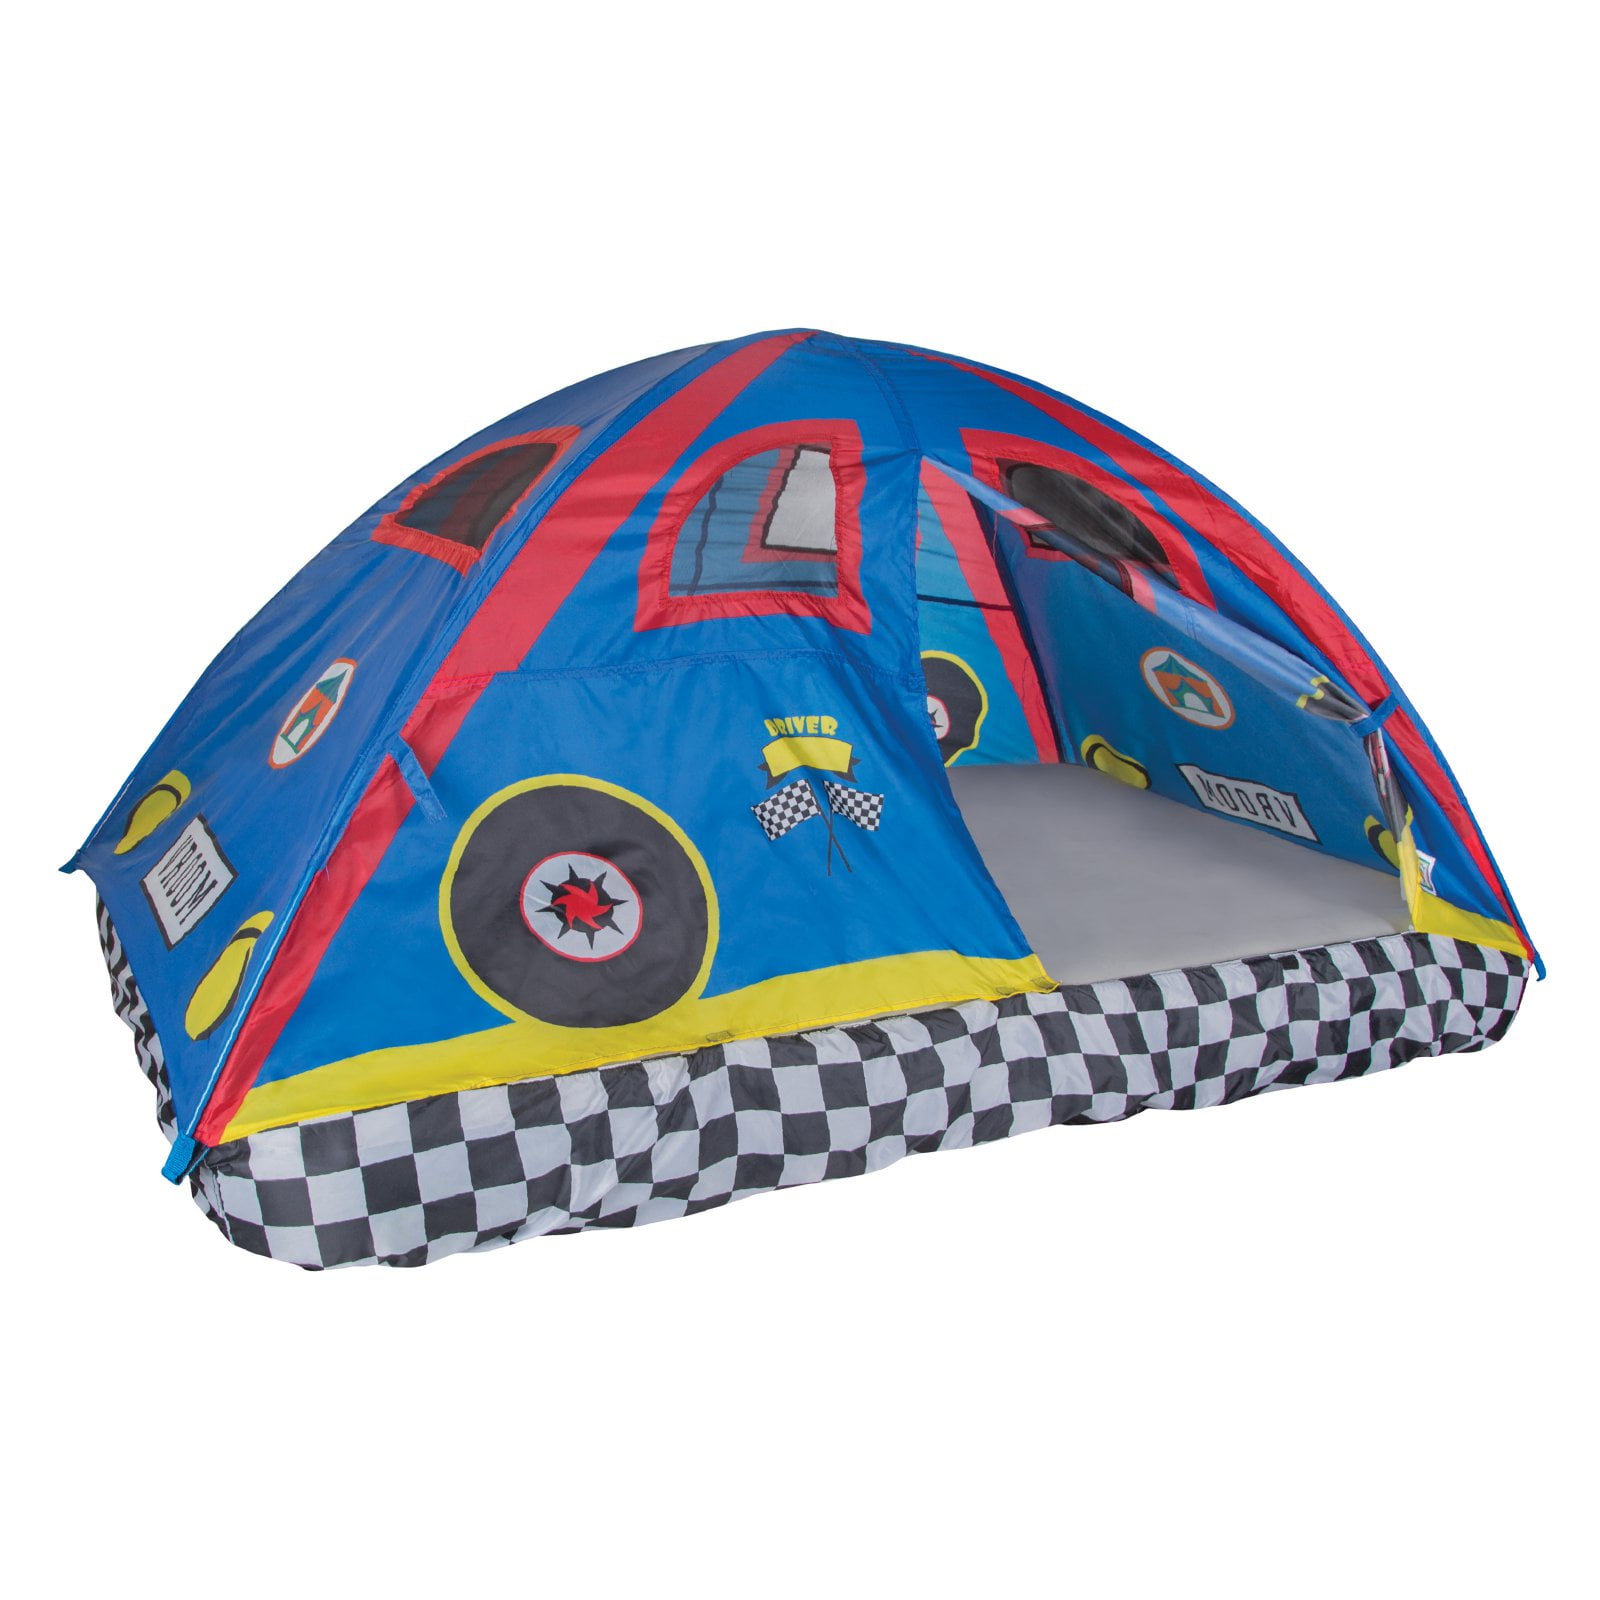 Pacific Play Tents 19711 PP Rad Racer Tent 77x54x42 for sale online 